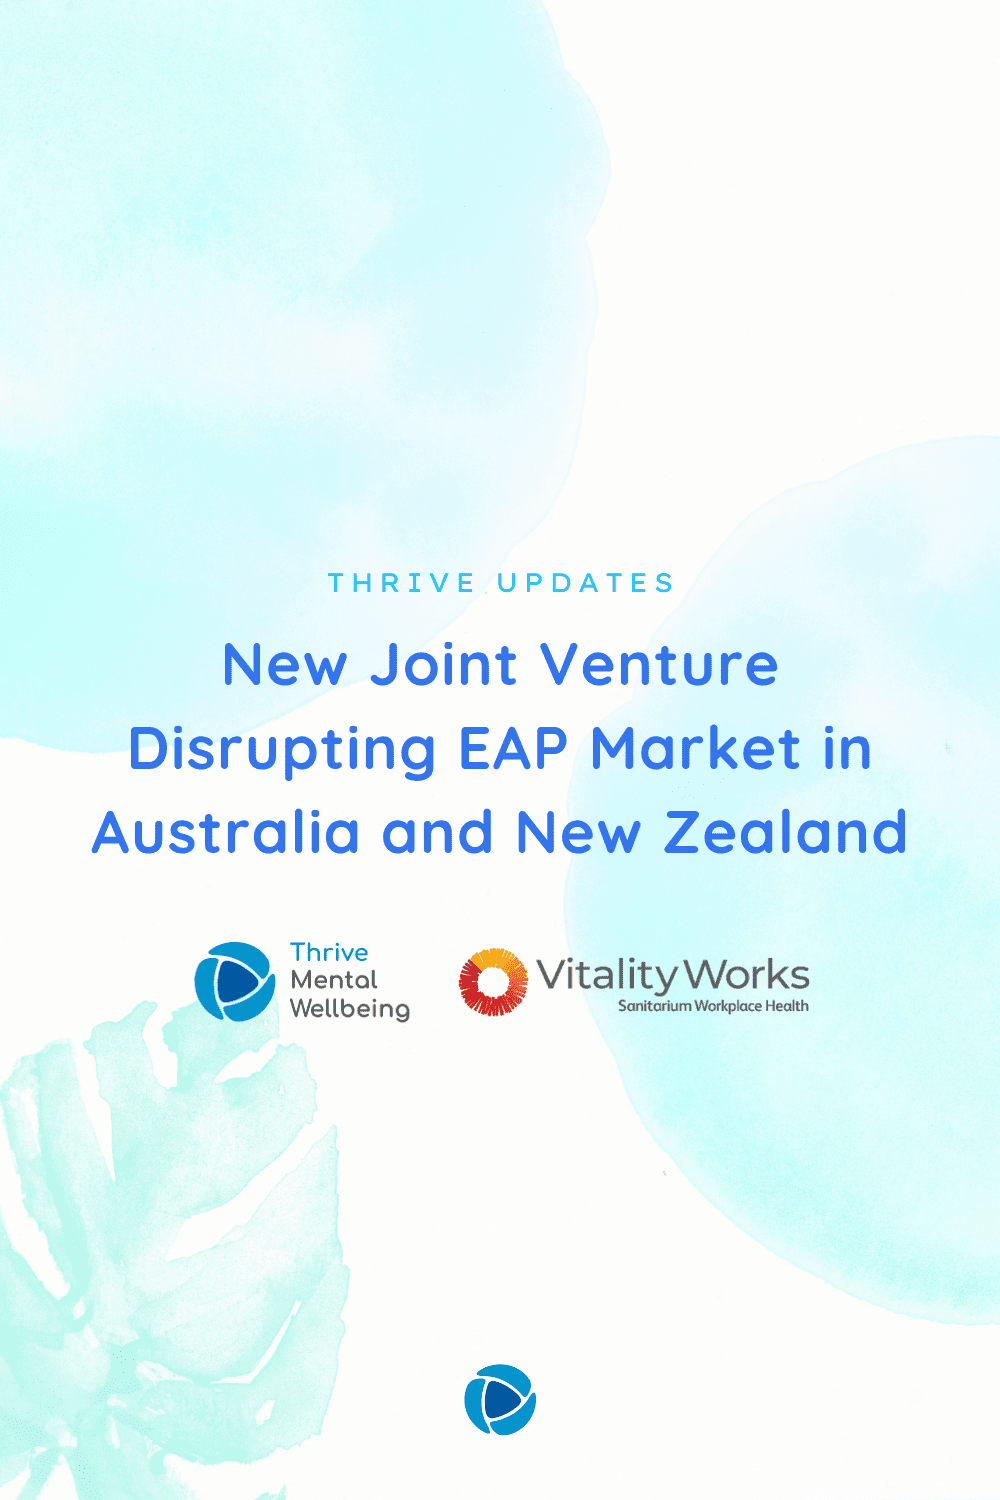 New Joint Venture Disrupting EAP Market in Australia and New Zealand